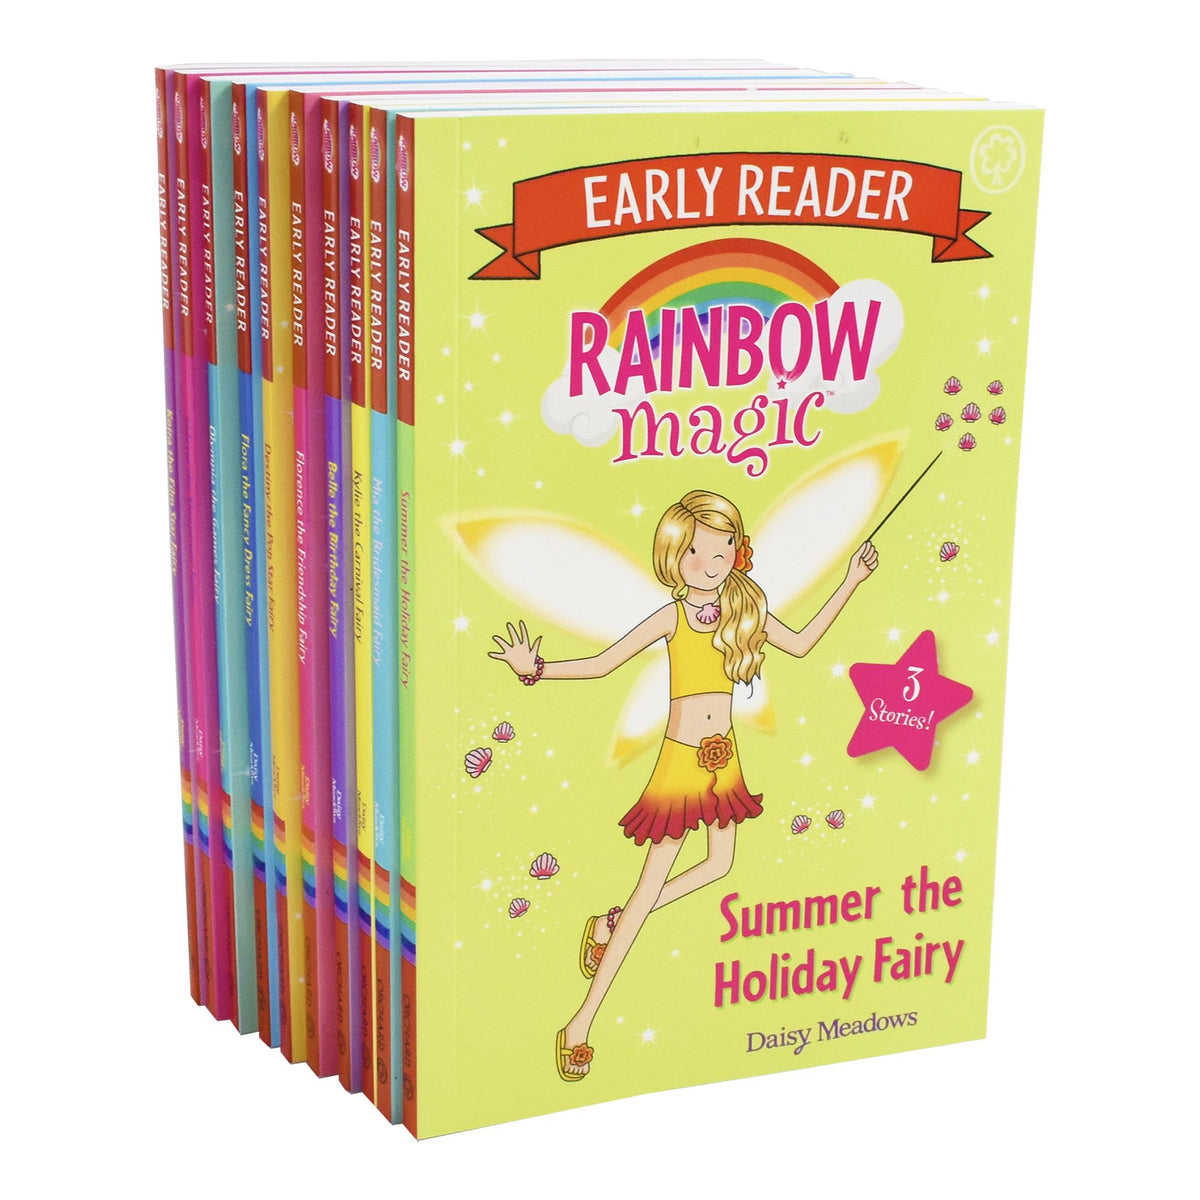 what age are early reader books for